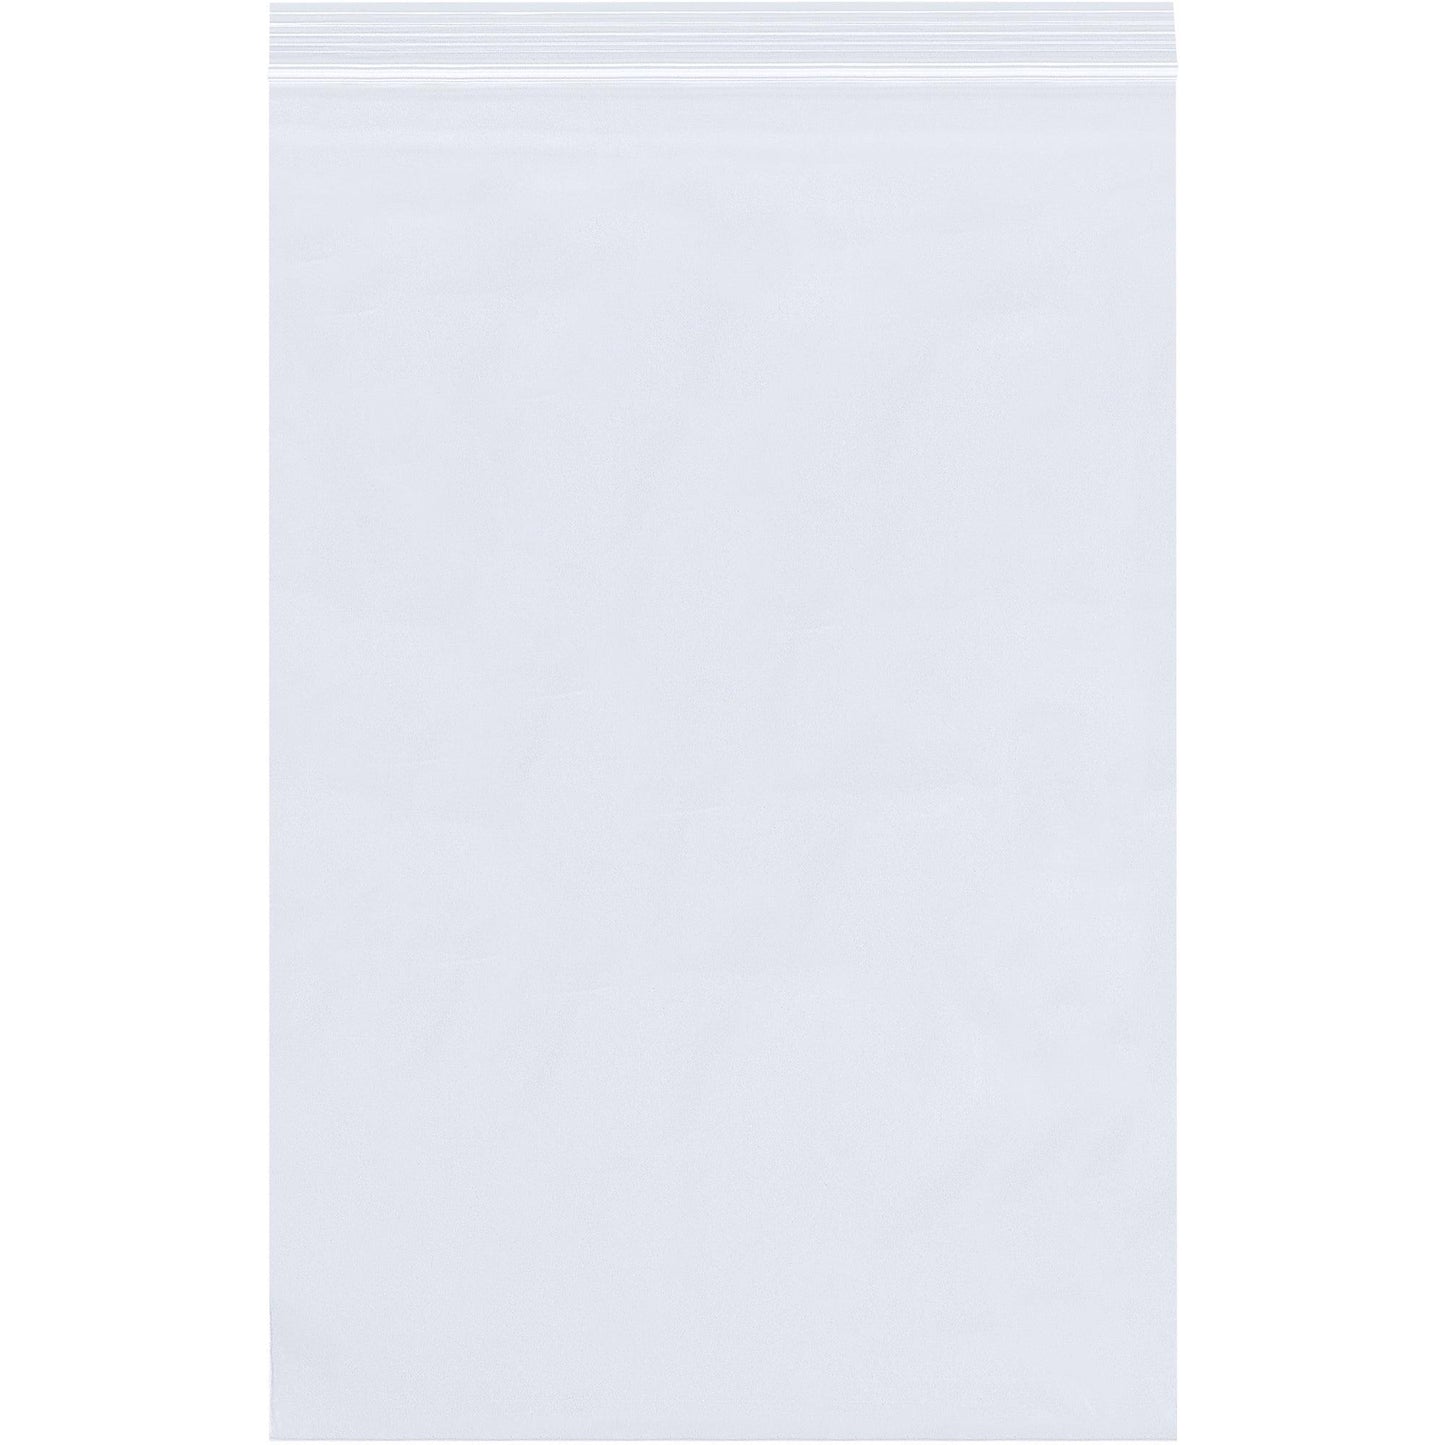 6 x 12" - 2 Mil Reclosable Poly Bags - PB3625